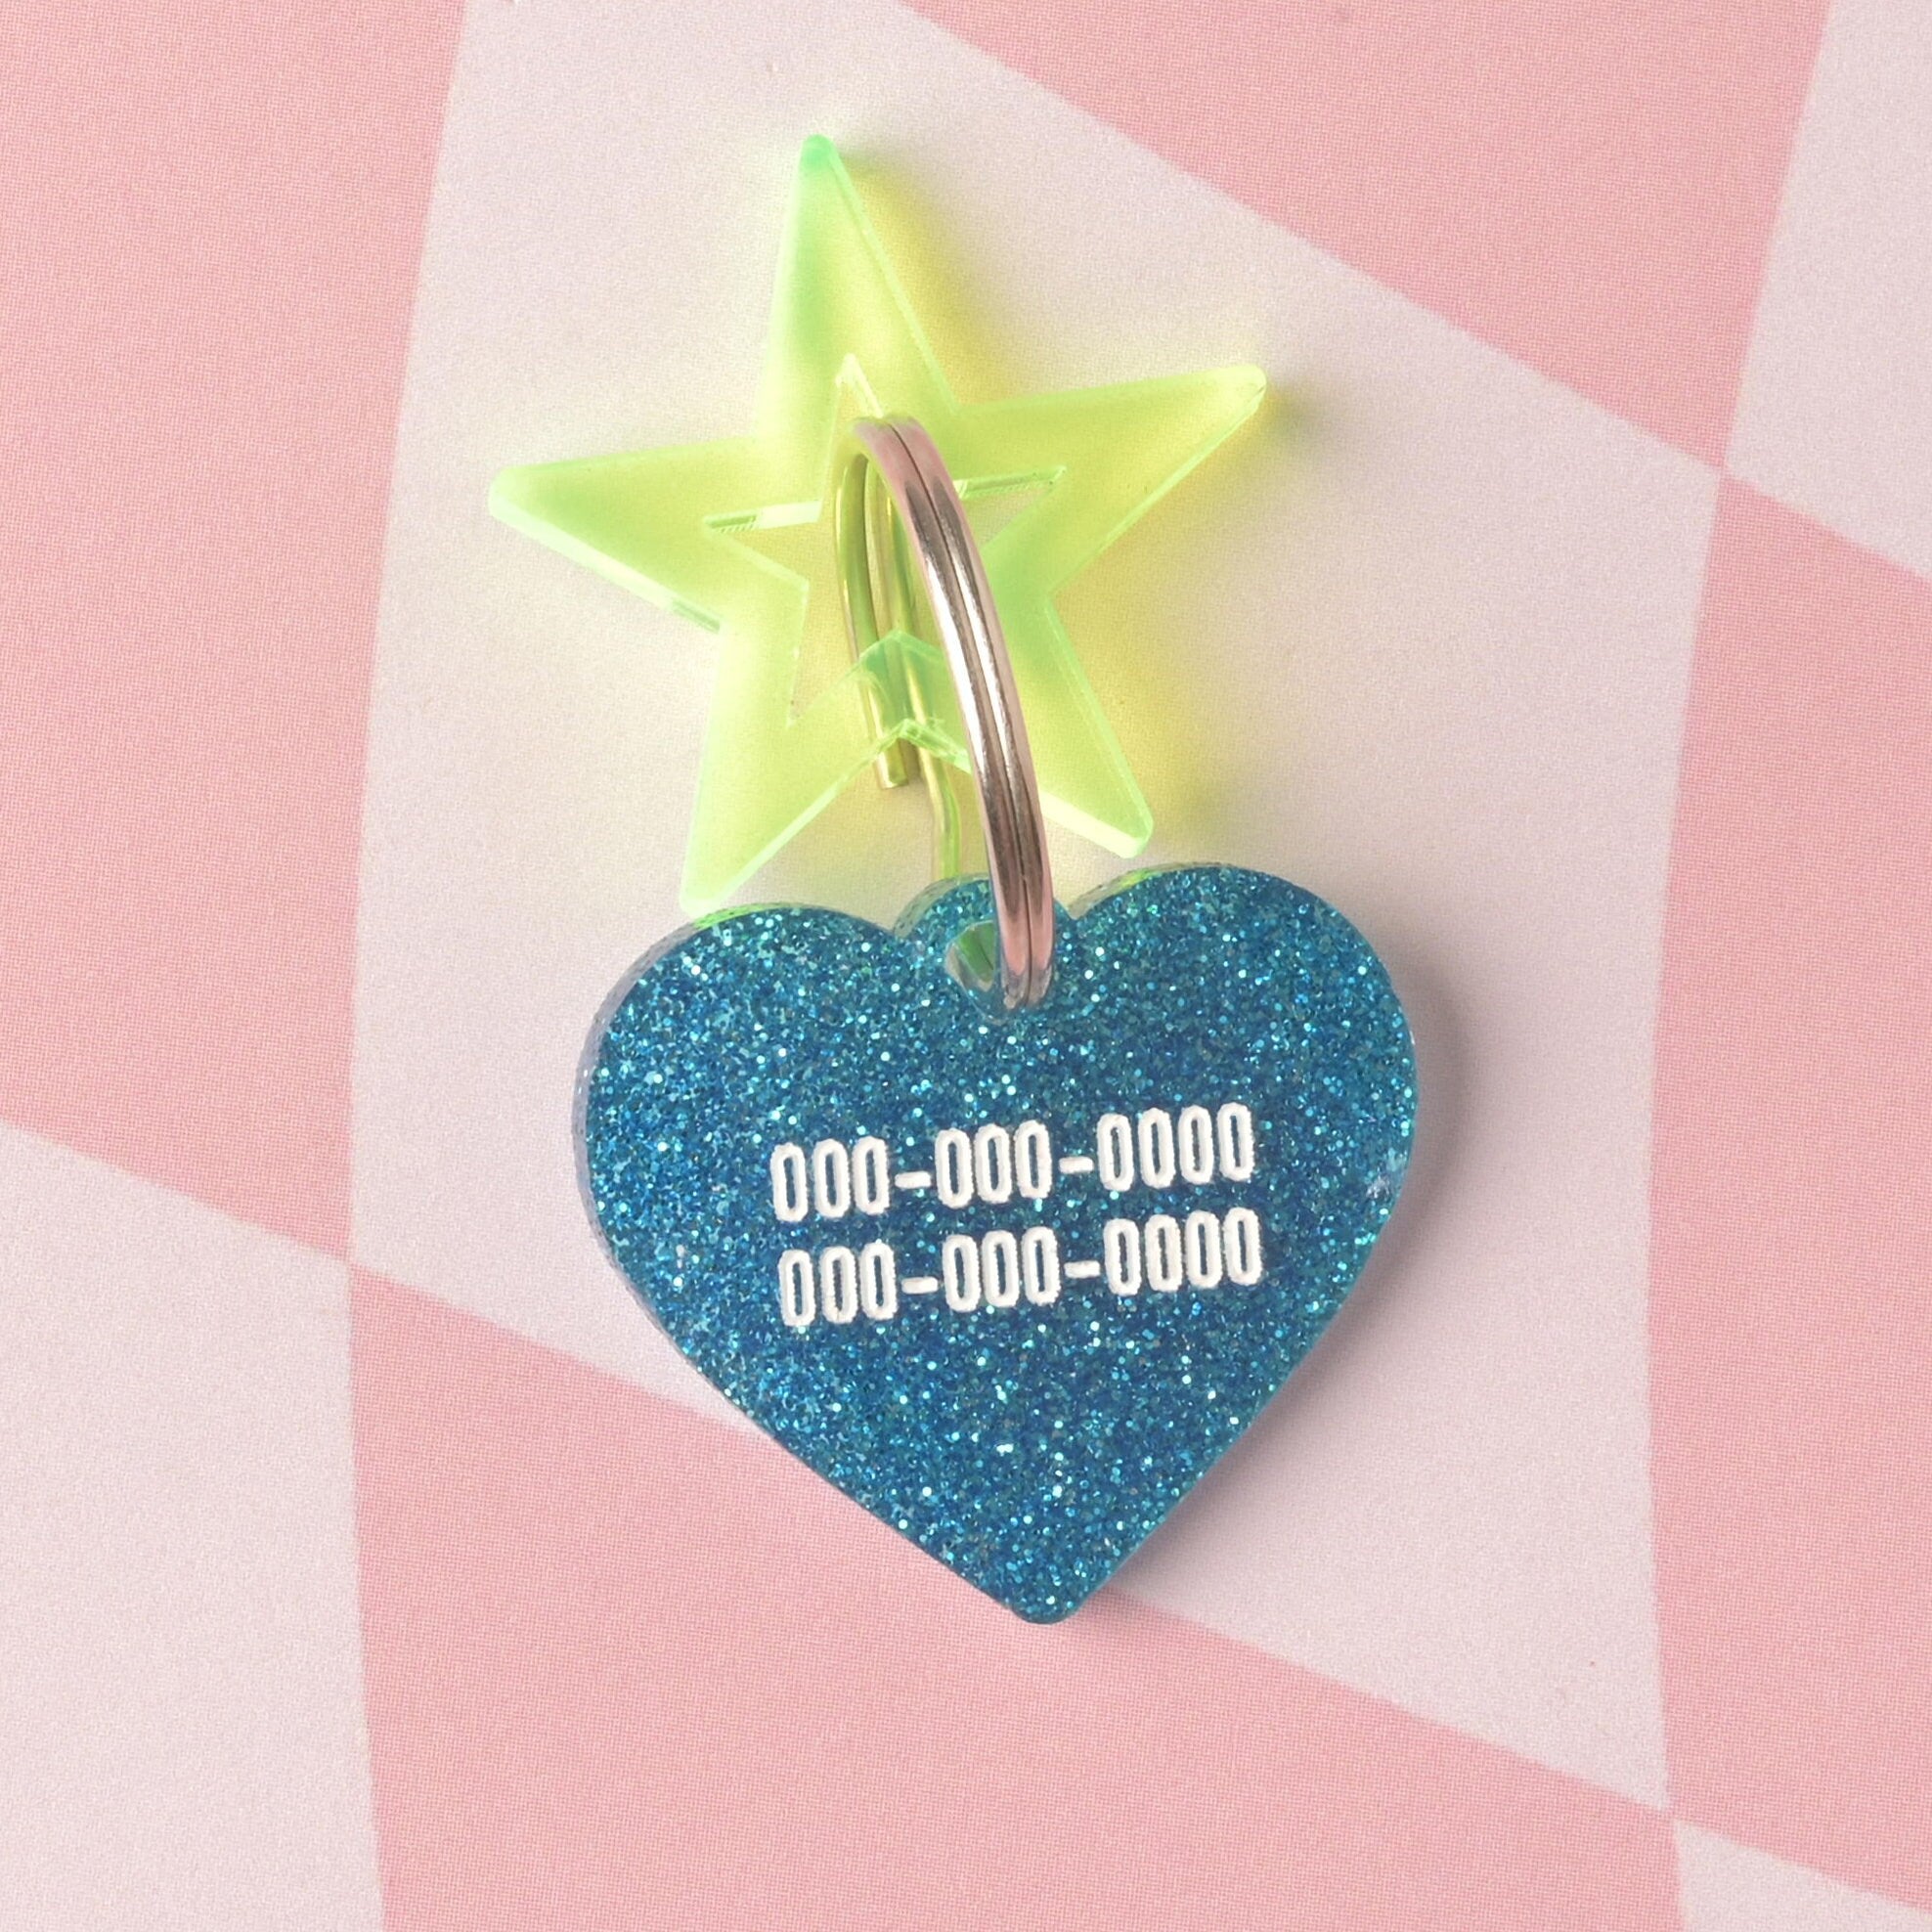 Barbie Inspired Personalized Pet Tag, Taffy Heart Shaped Tag for Cats and Dogs, Limited Edition, Custom Name and Contact Info Engraved